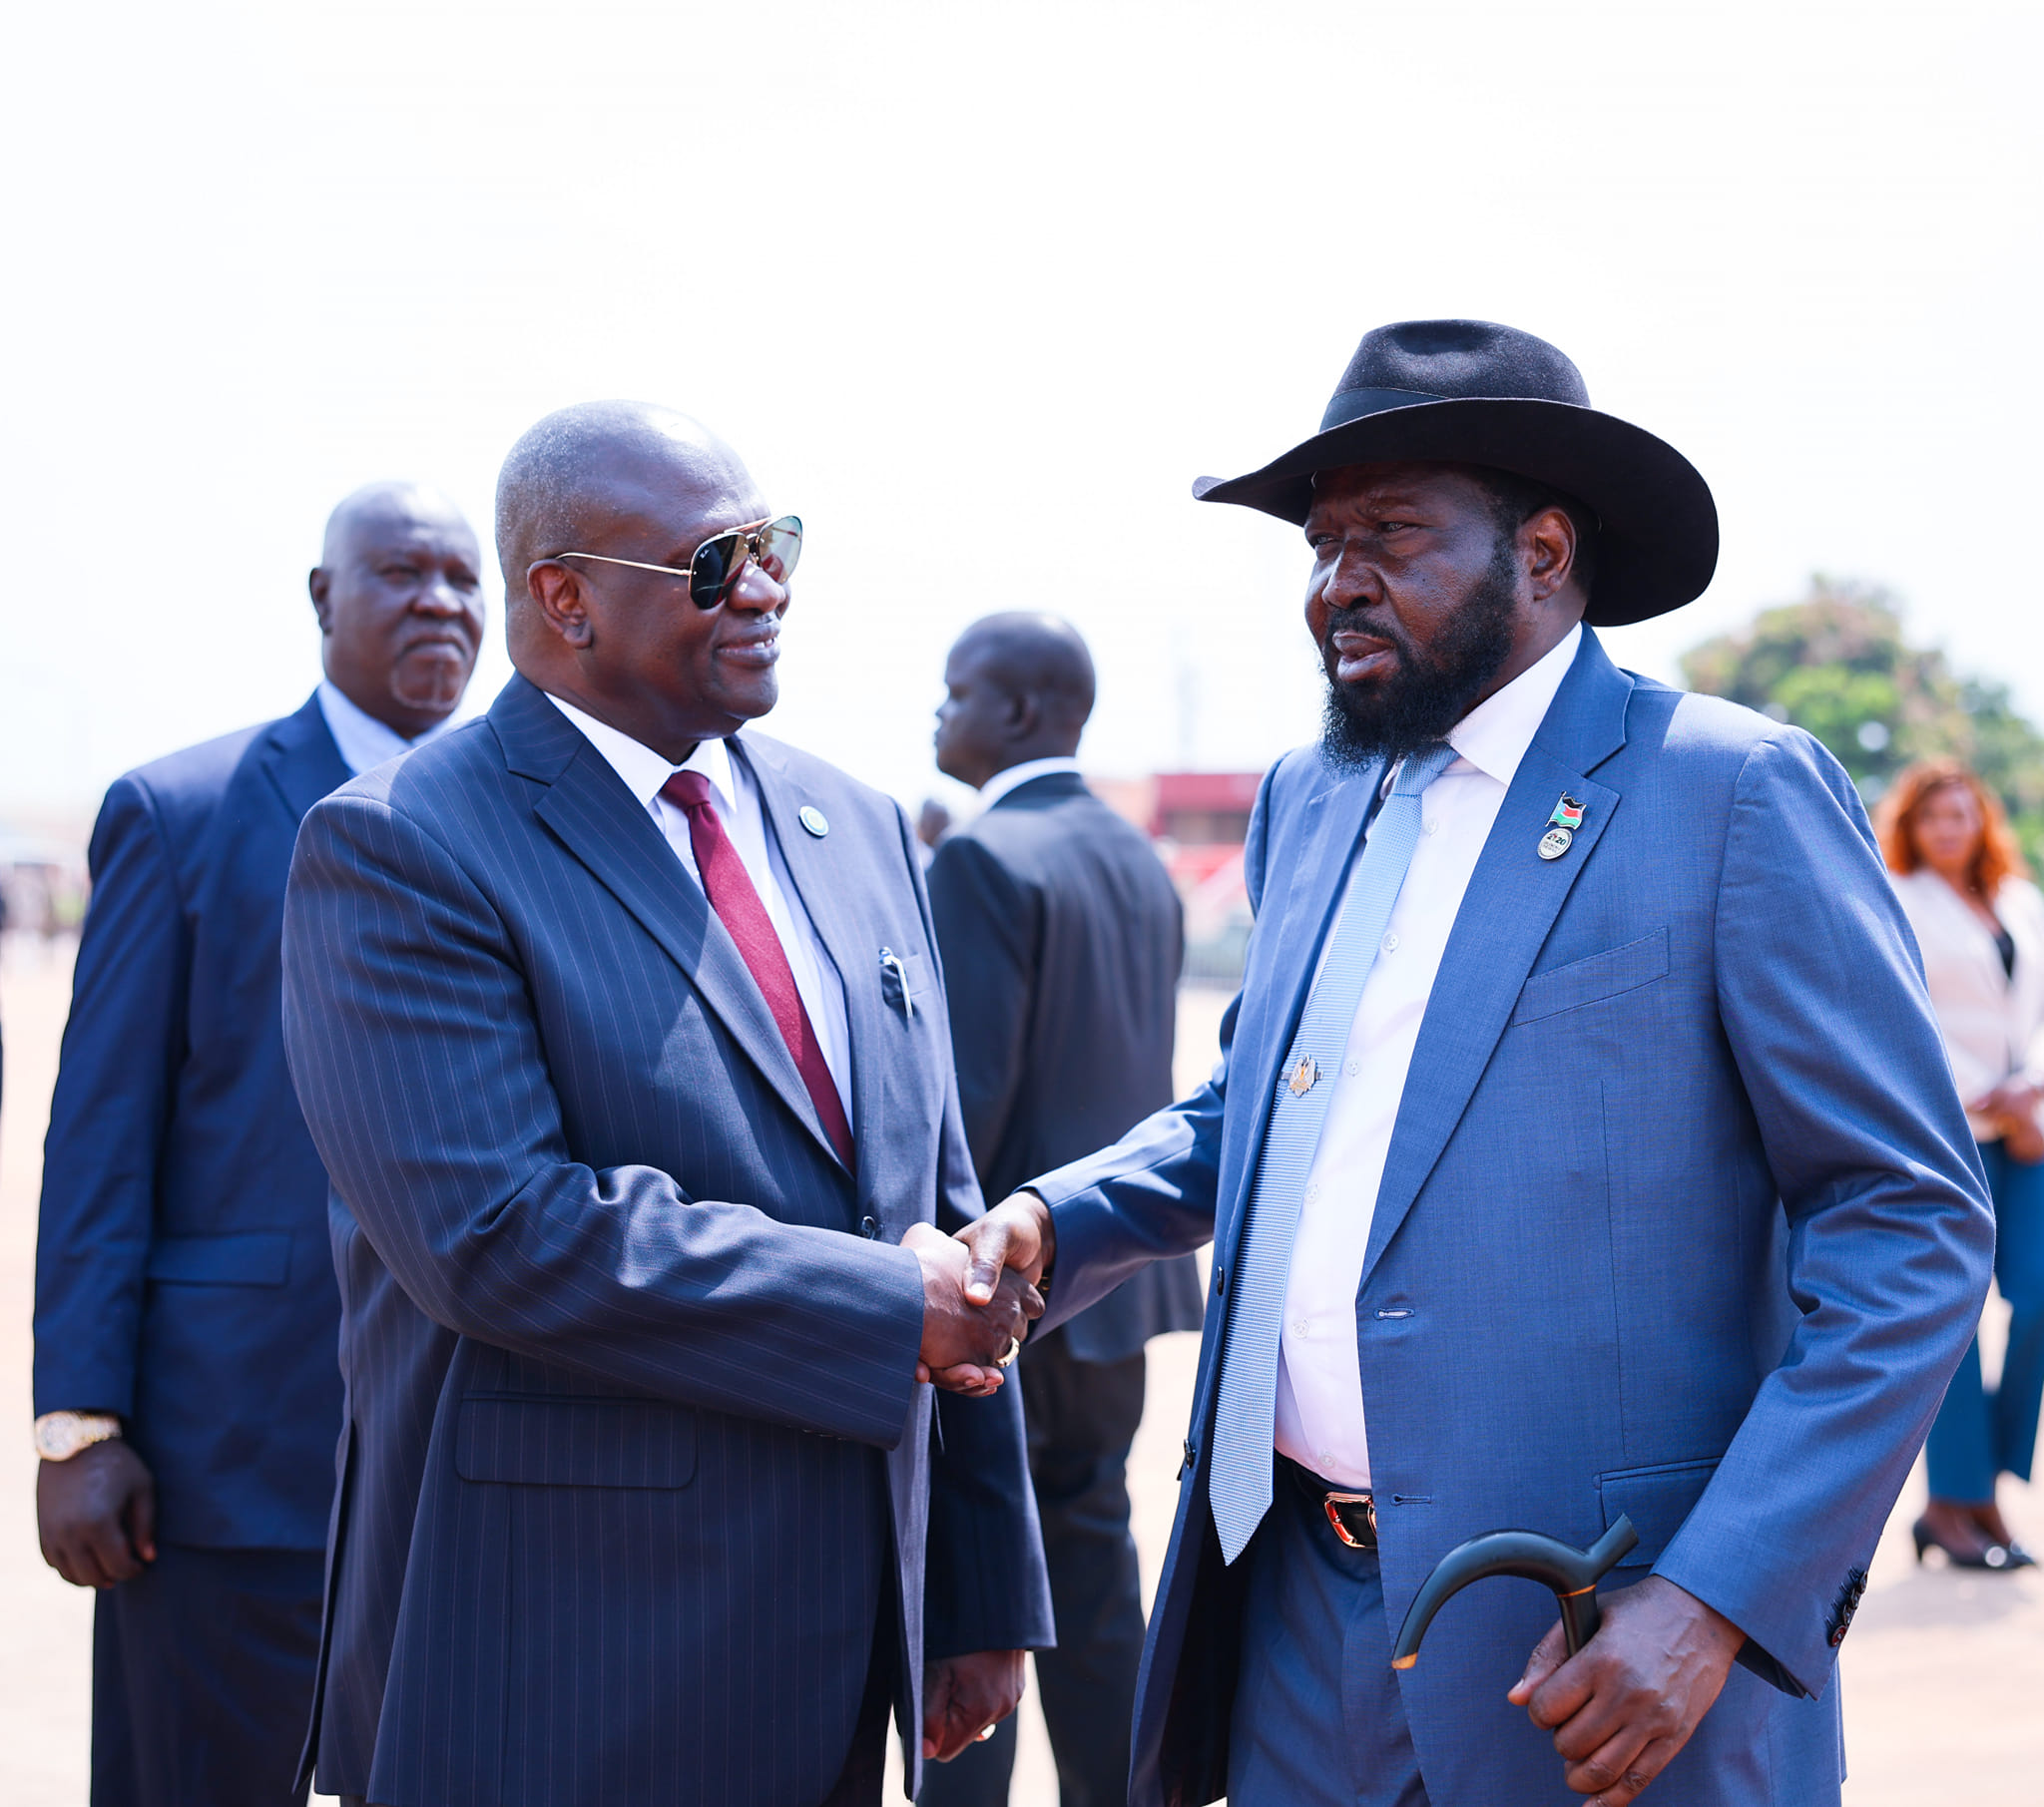 Lawmaker proposes two more years for Kiir, Machar; demotion for VPs